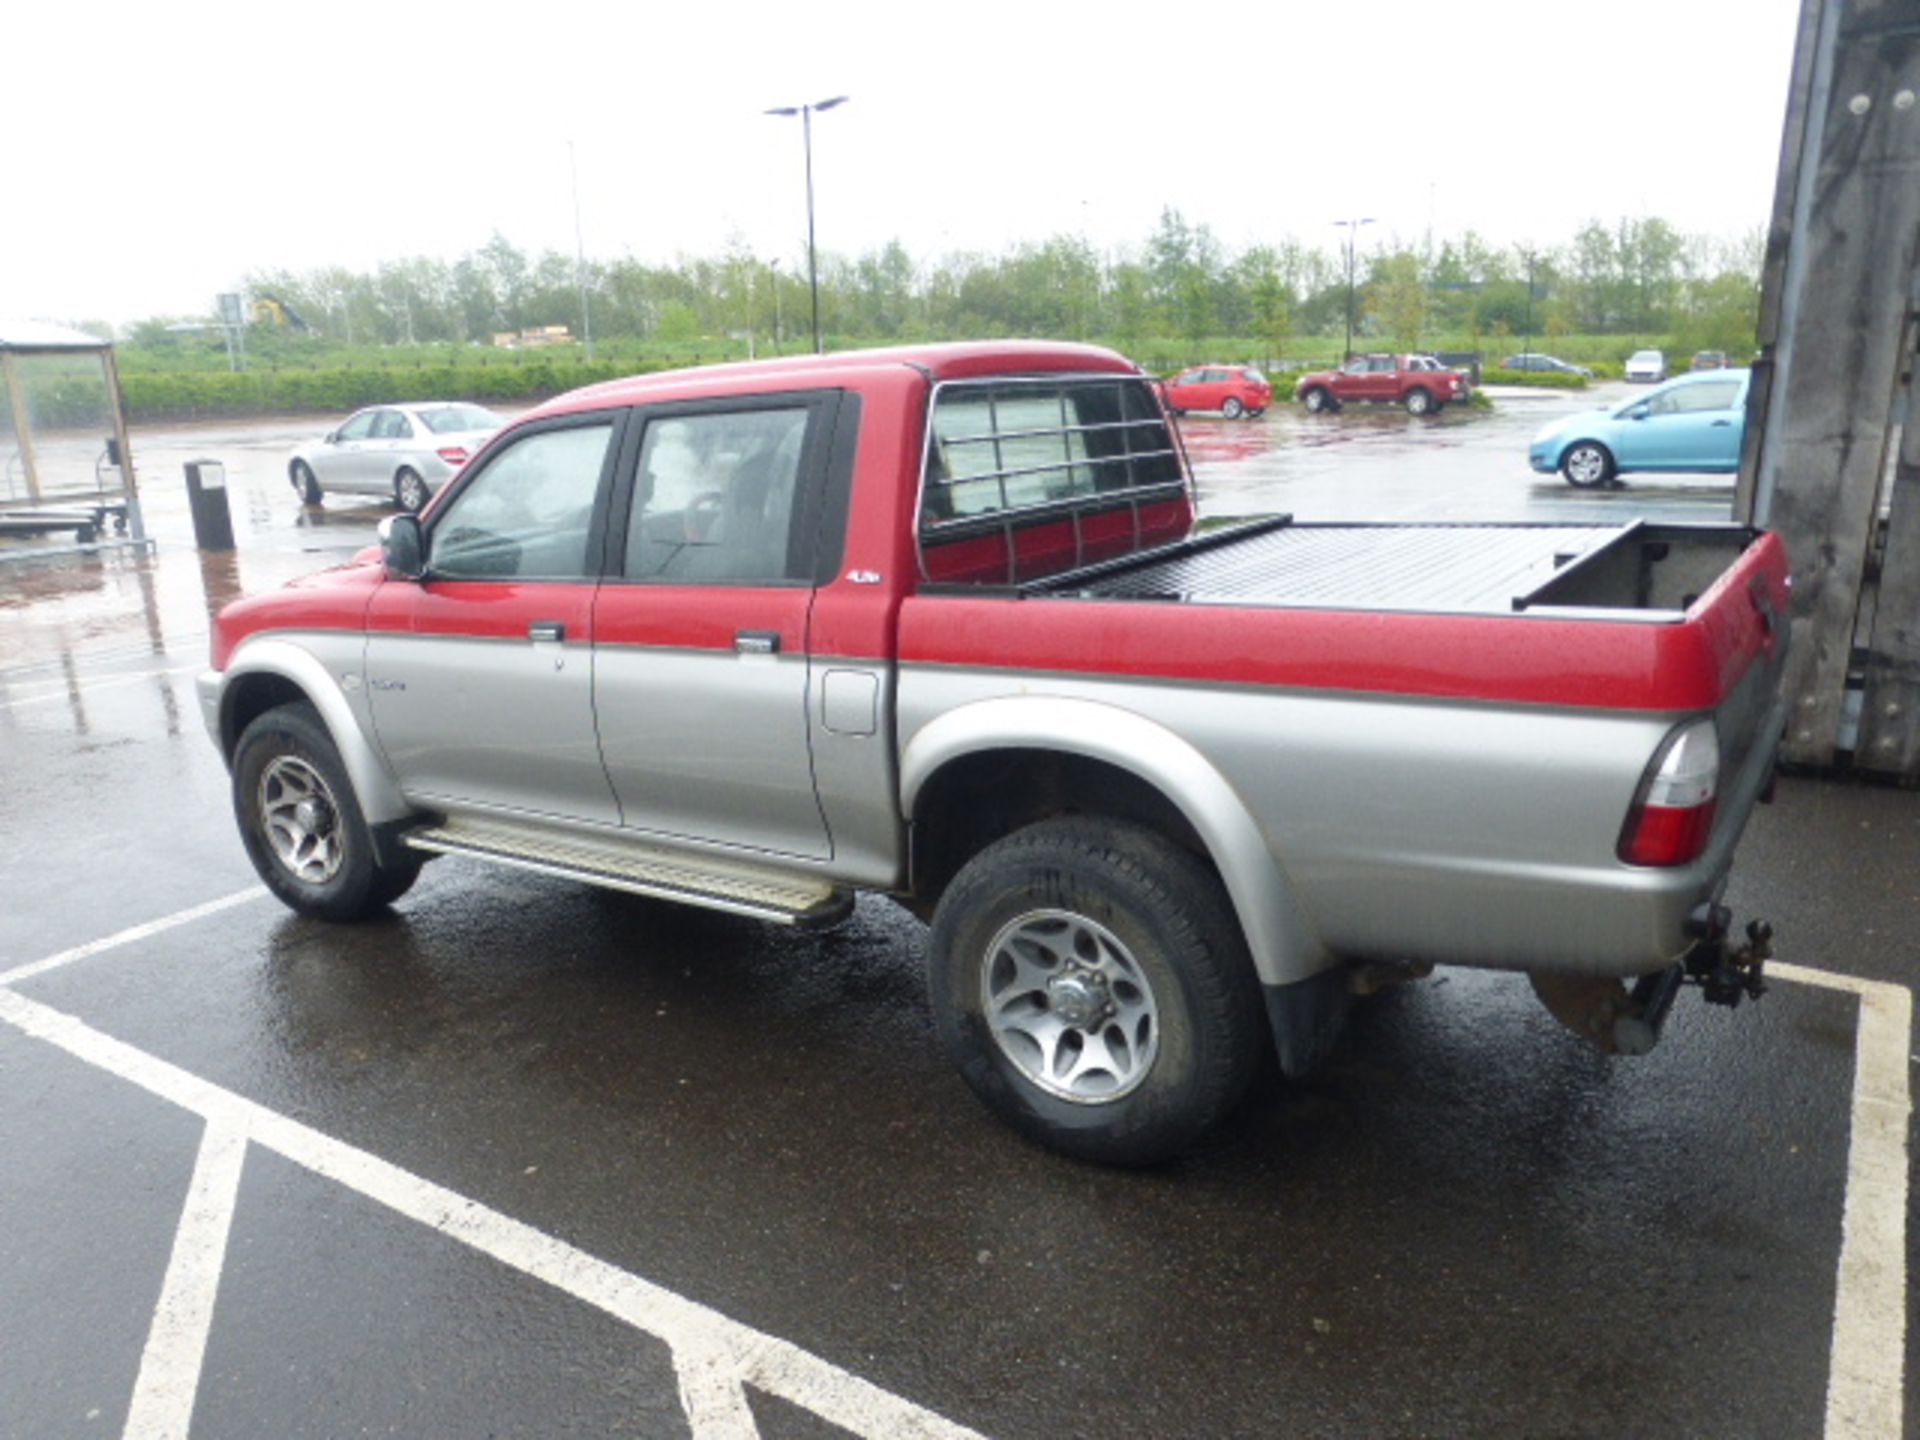 YB54 WNL (2005) Mitsubishi L200 2.5td 4-Life 4WD, 2477cc diesel in red/silver MOT: 14/5/21 - Image 4 of 8